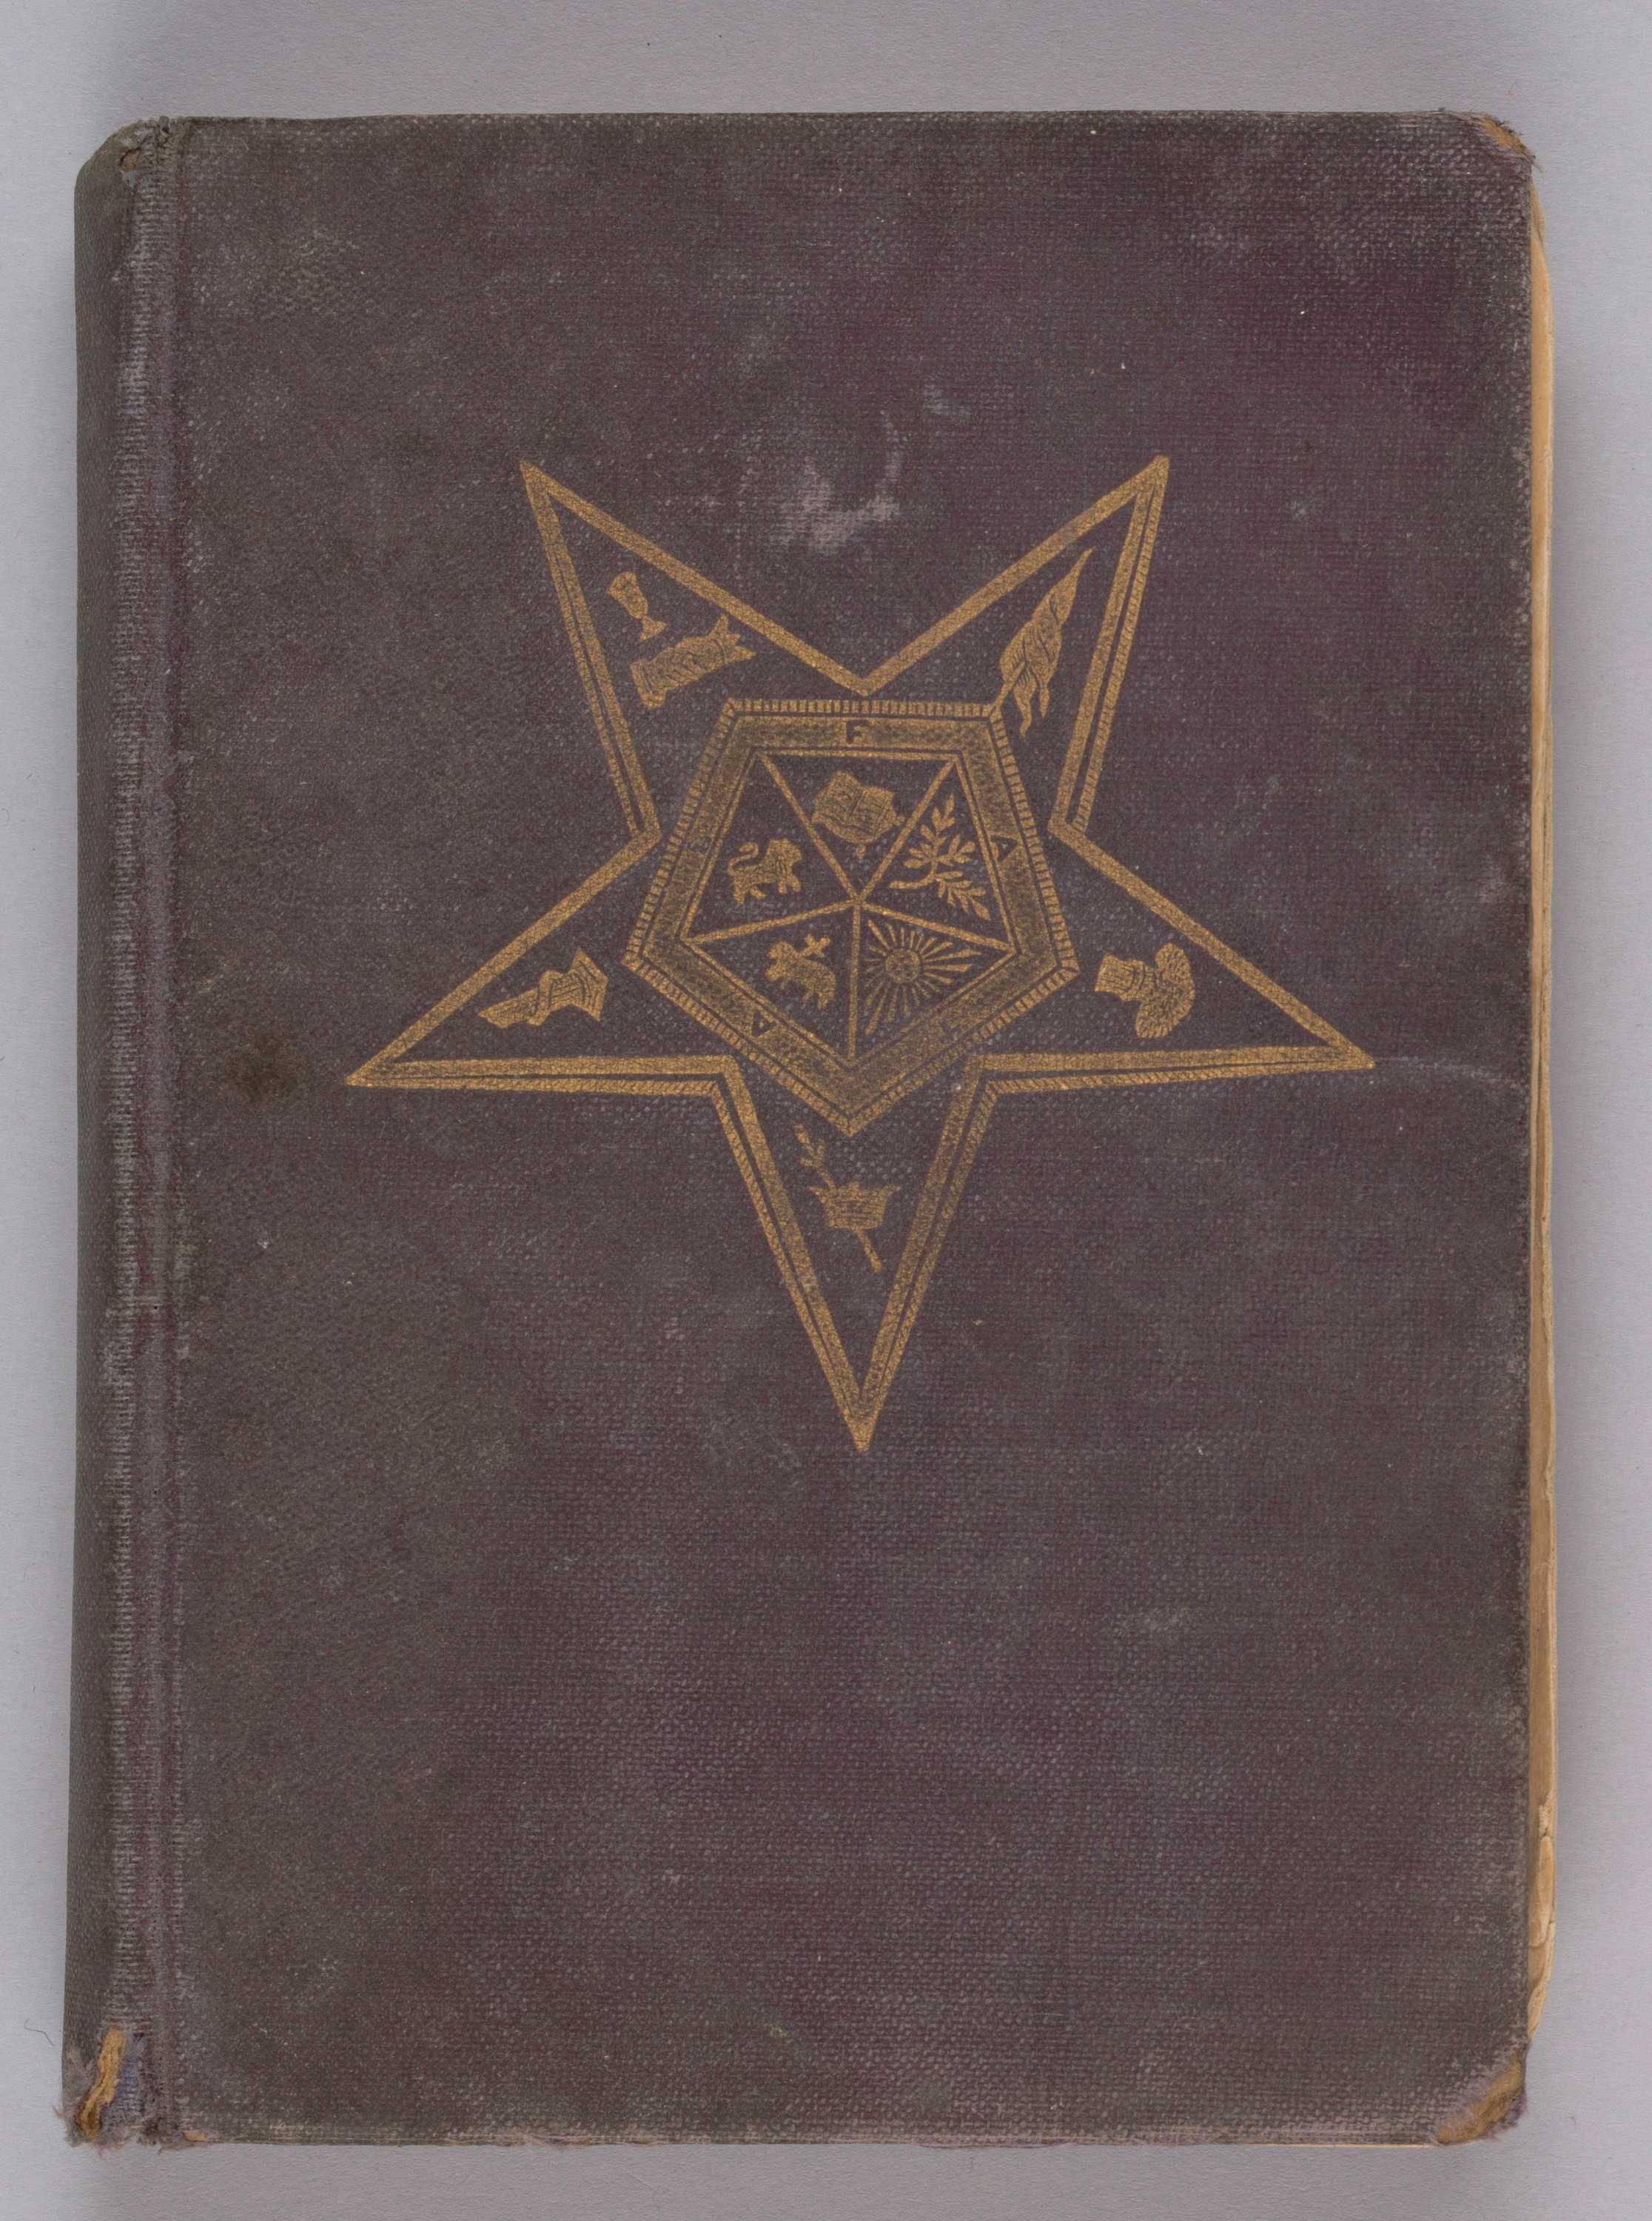 This book of instruction, totaling 240 pages, pertains to the organization, government and ceremonies of Chapters of the Order of the Eastern Star.